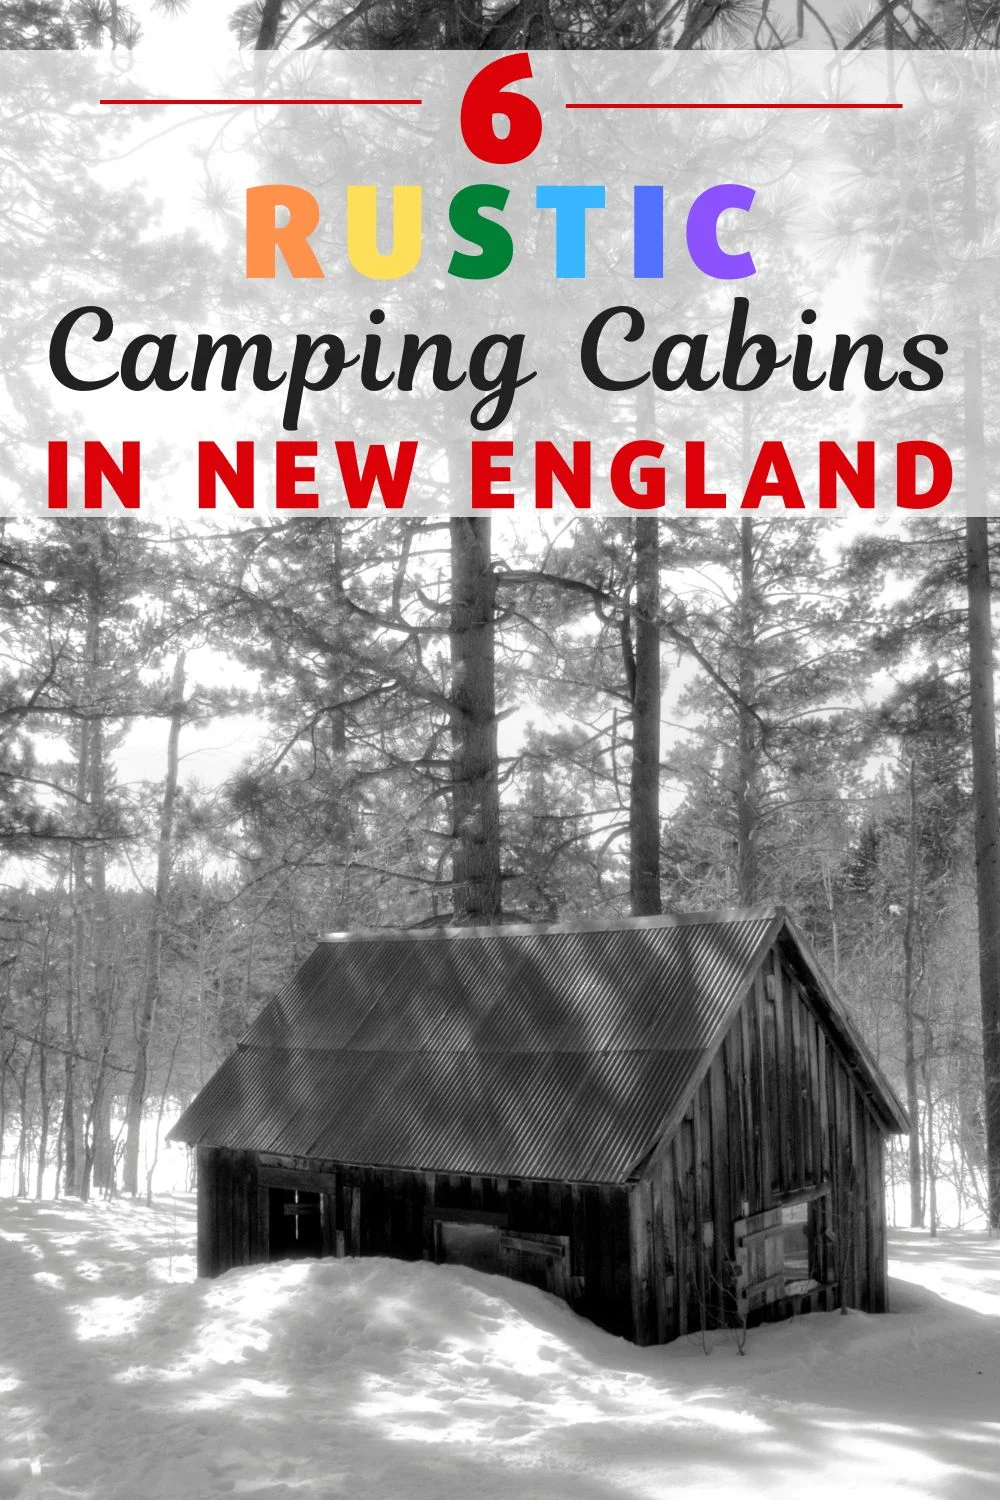 A black and white photo of a rustic cabin in the snow. Text overlay: 6 Rustic Camping Cabins in New England.